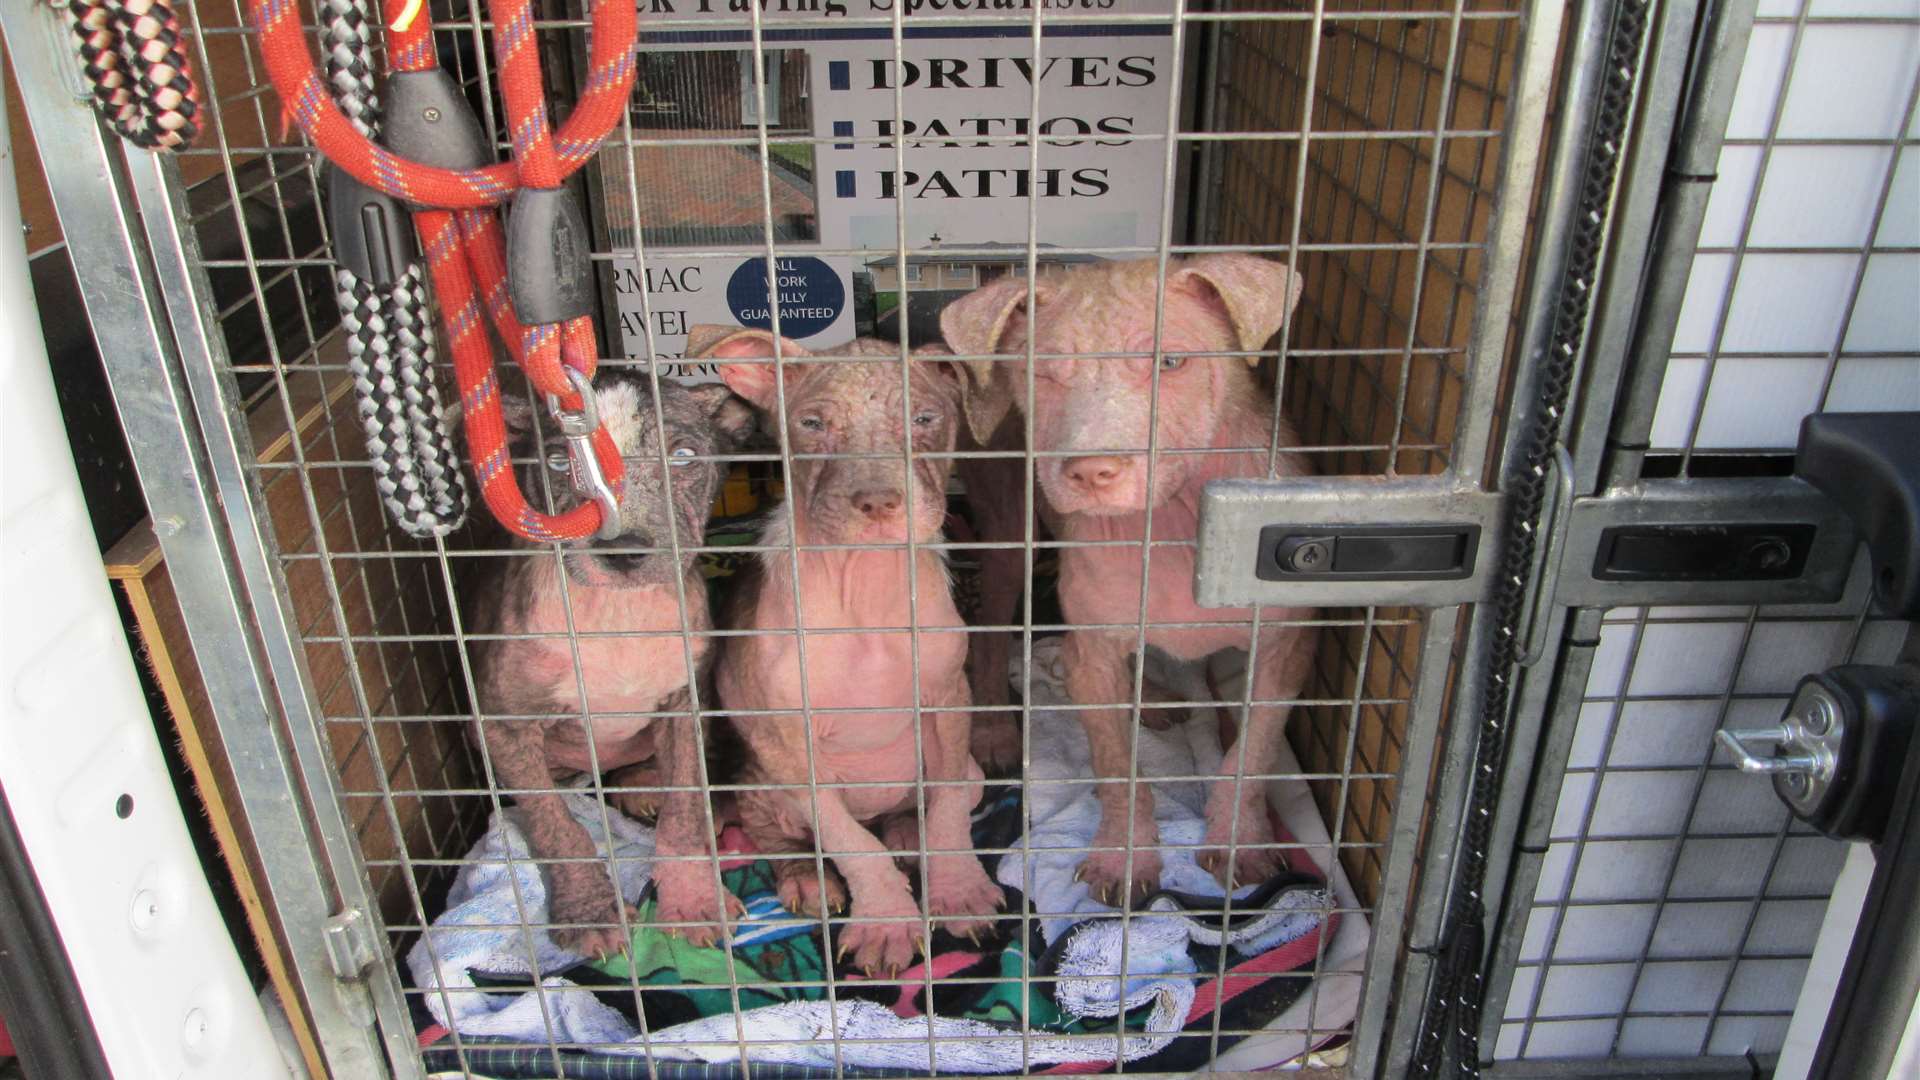 The pups had to be hand-nursed through the night after suffering bad sunburn